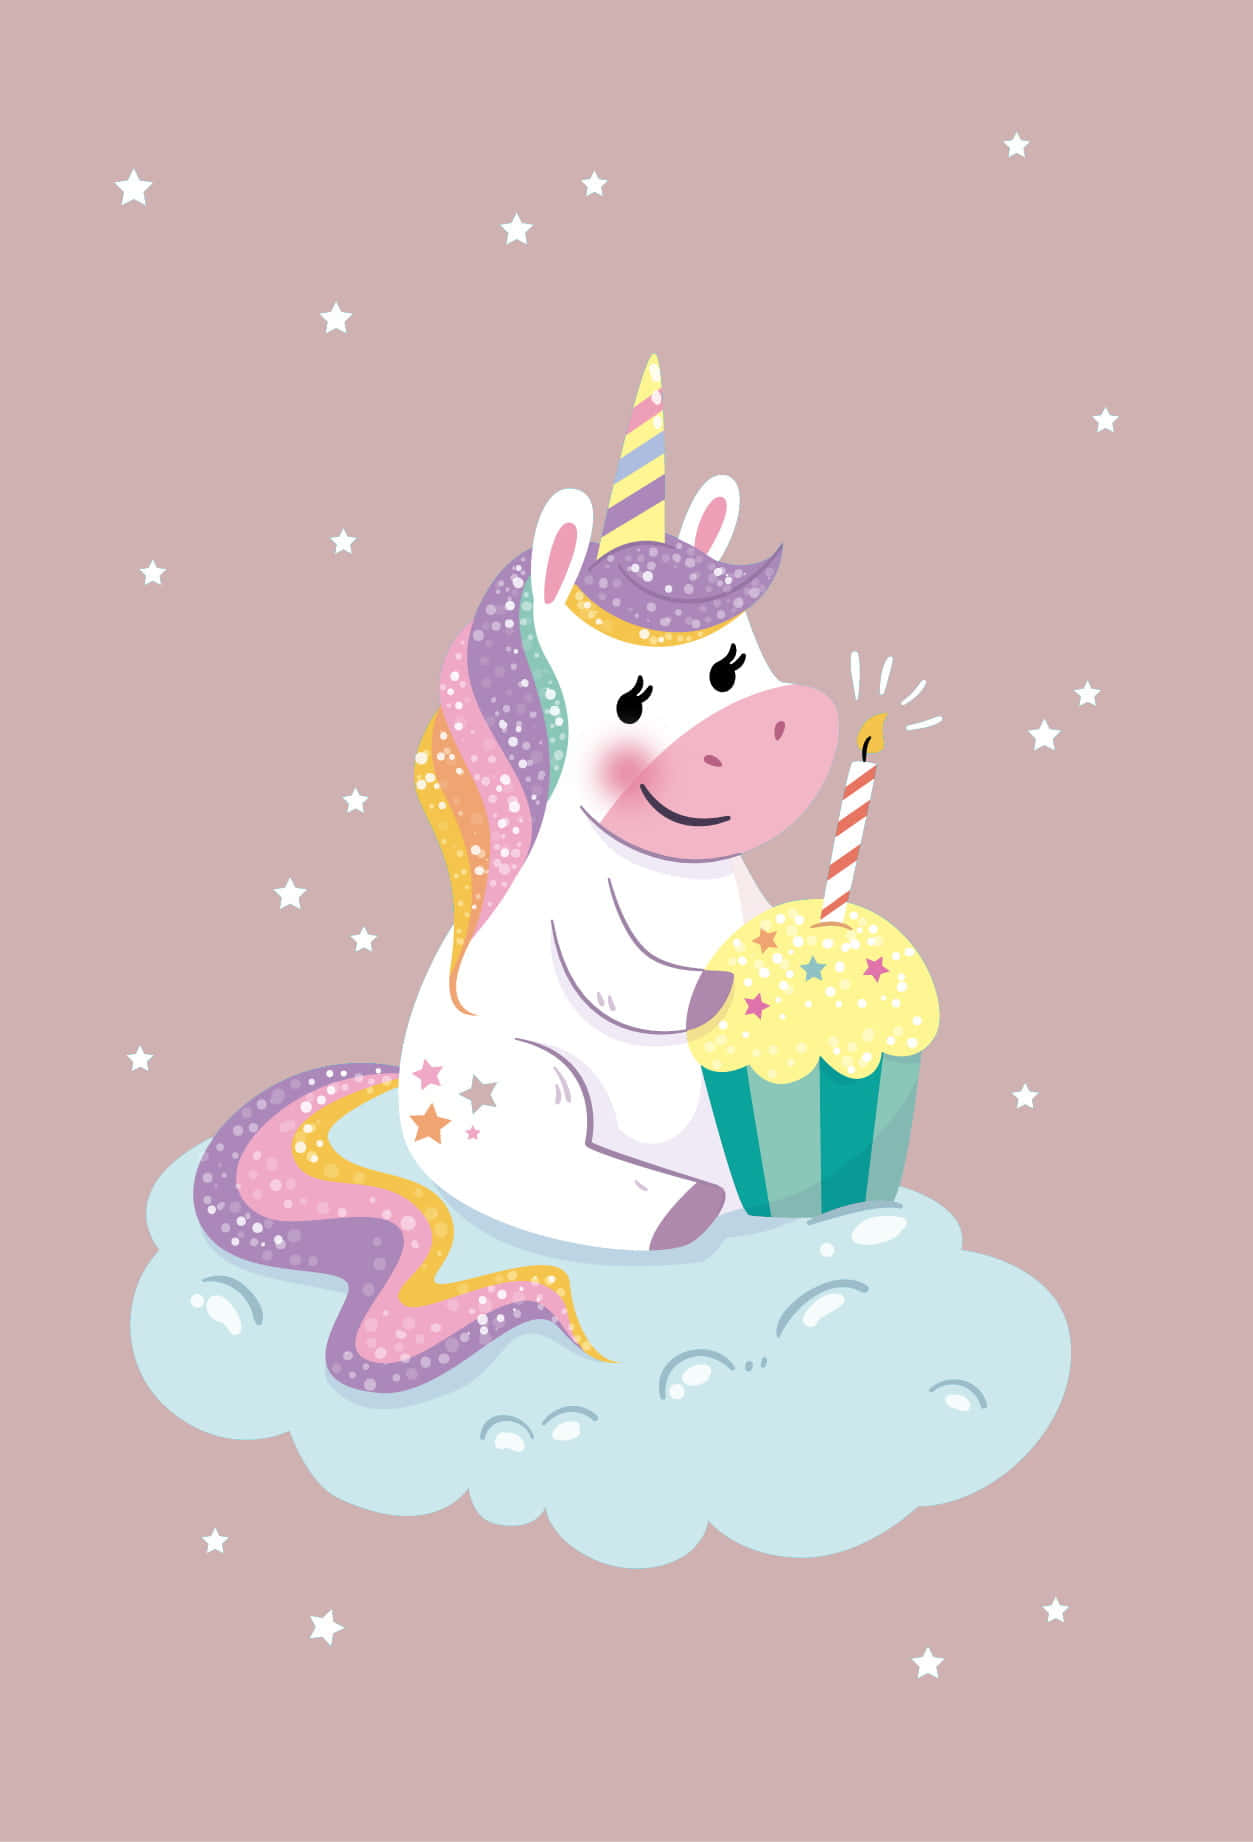 Enchanting Cute Unicorn in a Magical Forest Wallpaper